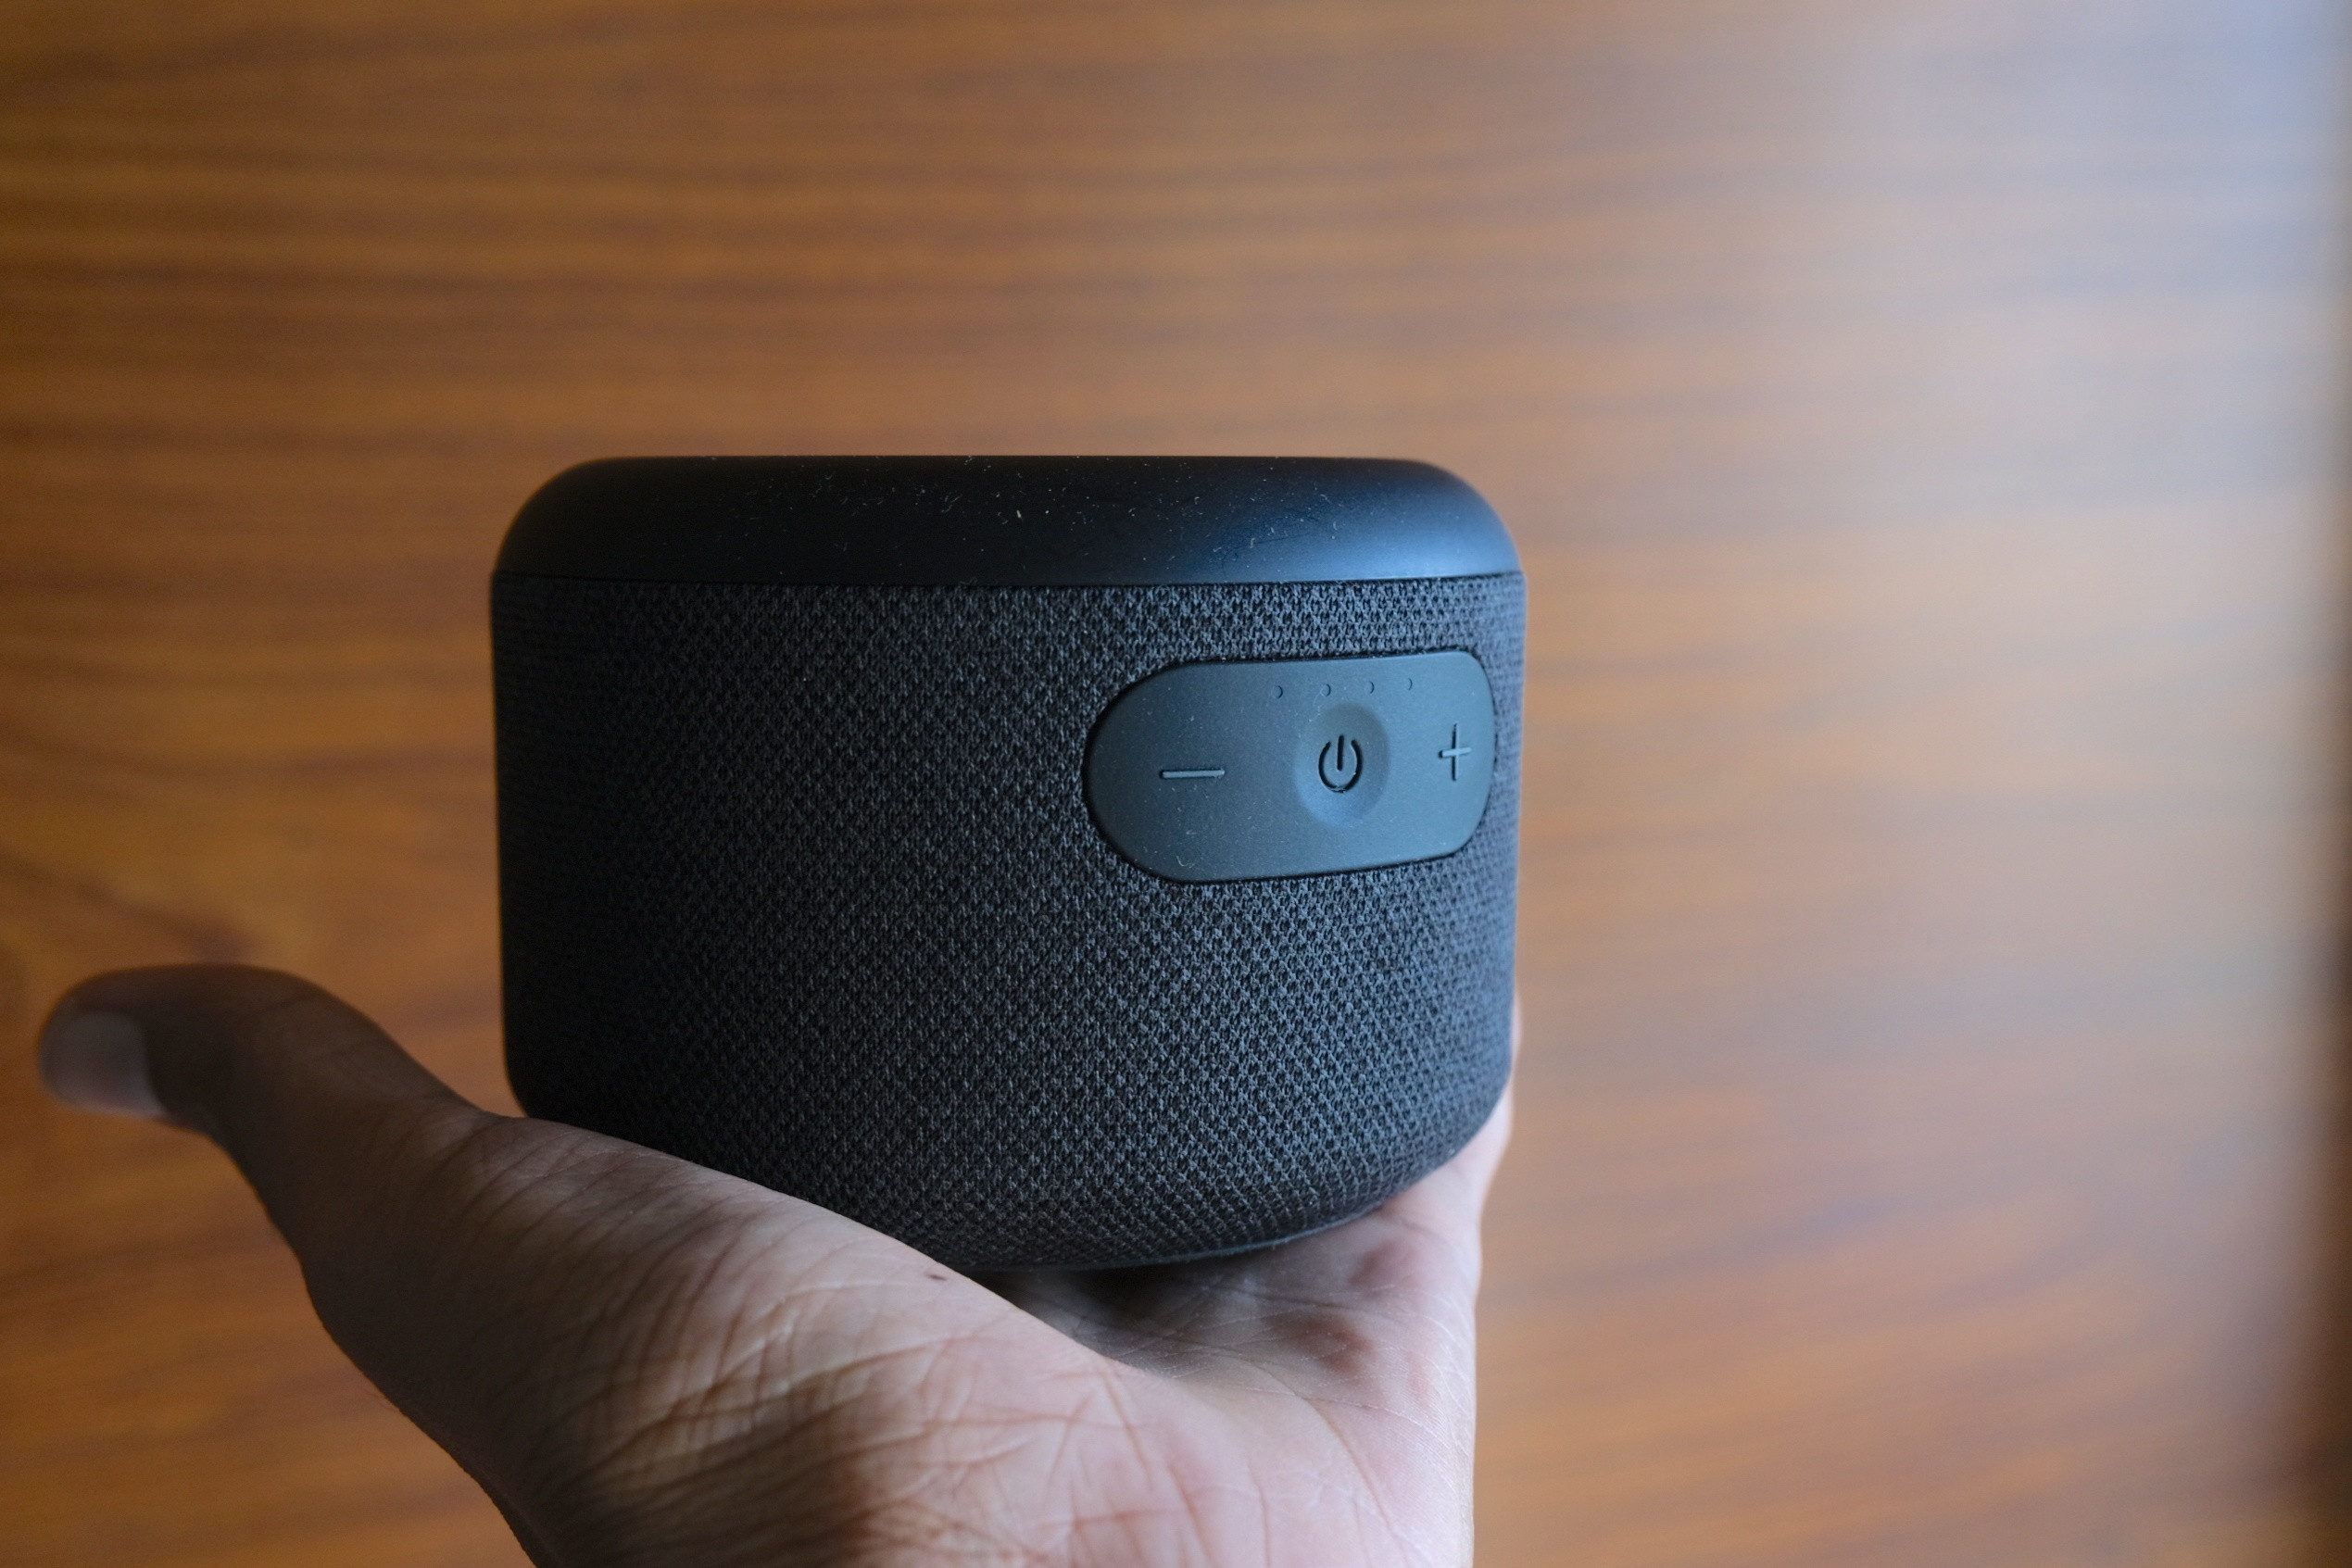 launches updated Echo Dot and Echo Plus in India, adds Echo